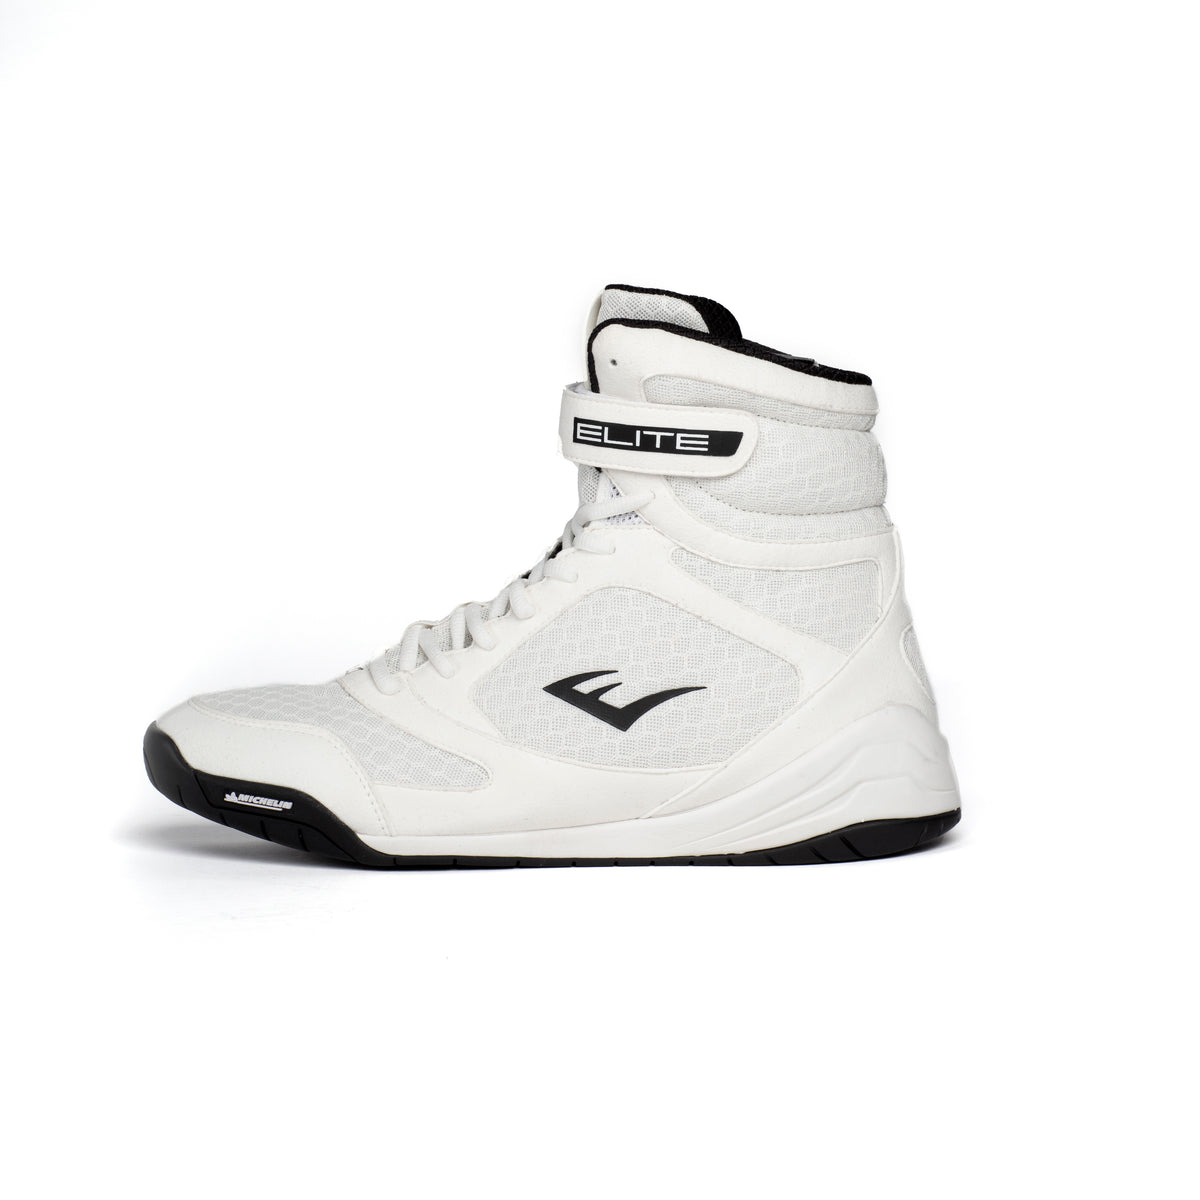 Everlast Elite 2.0 High Top Boxing Shoes WHITE